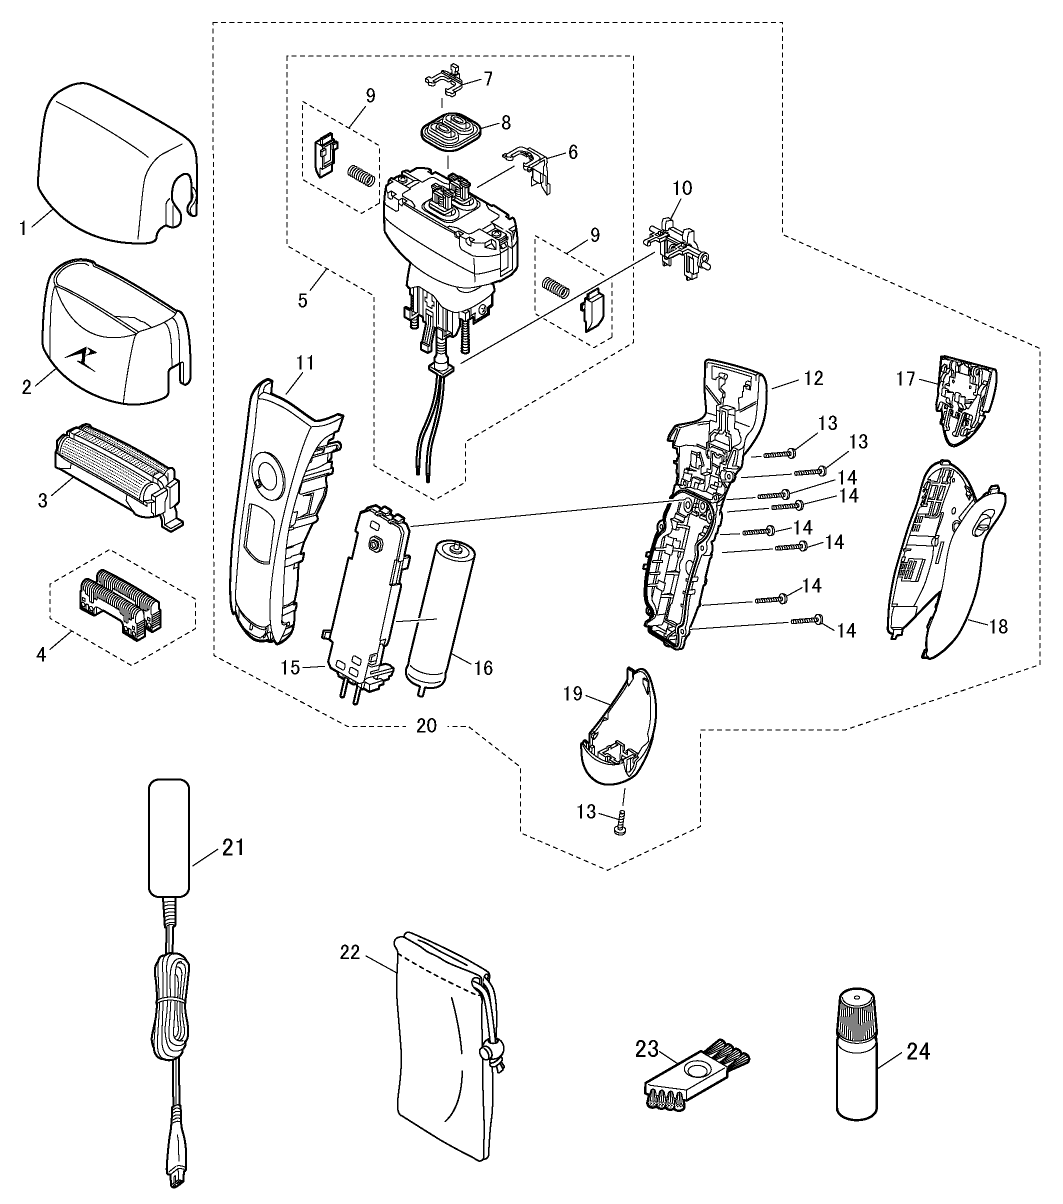 ES-LT31: Exploded View